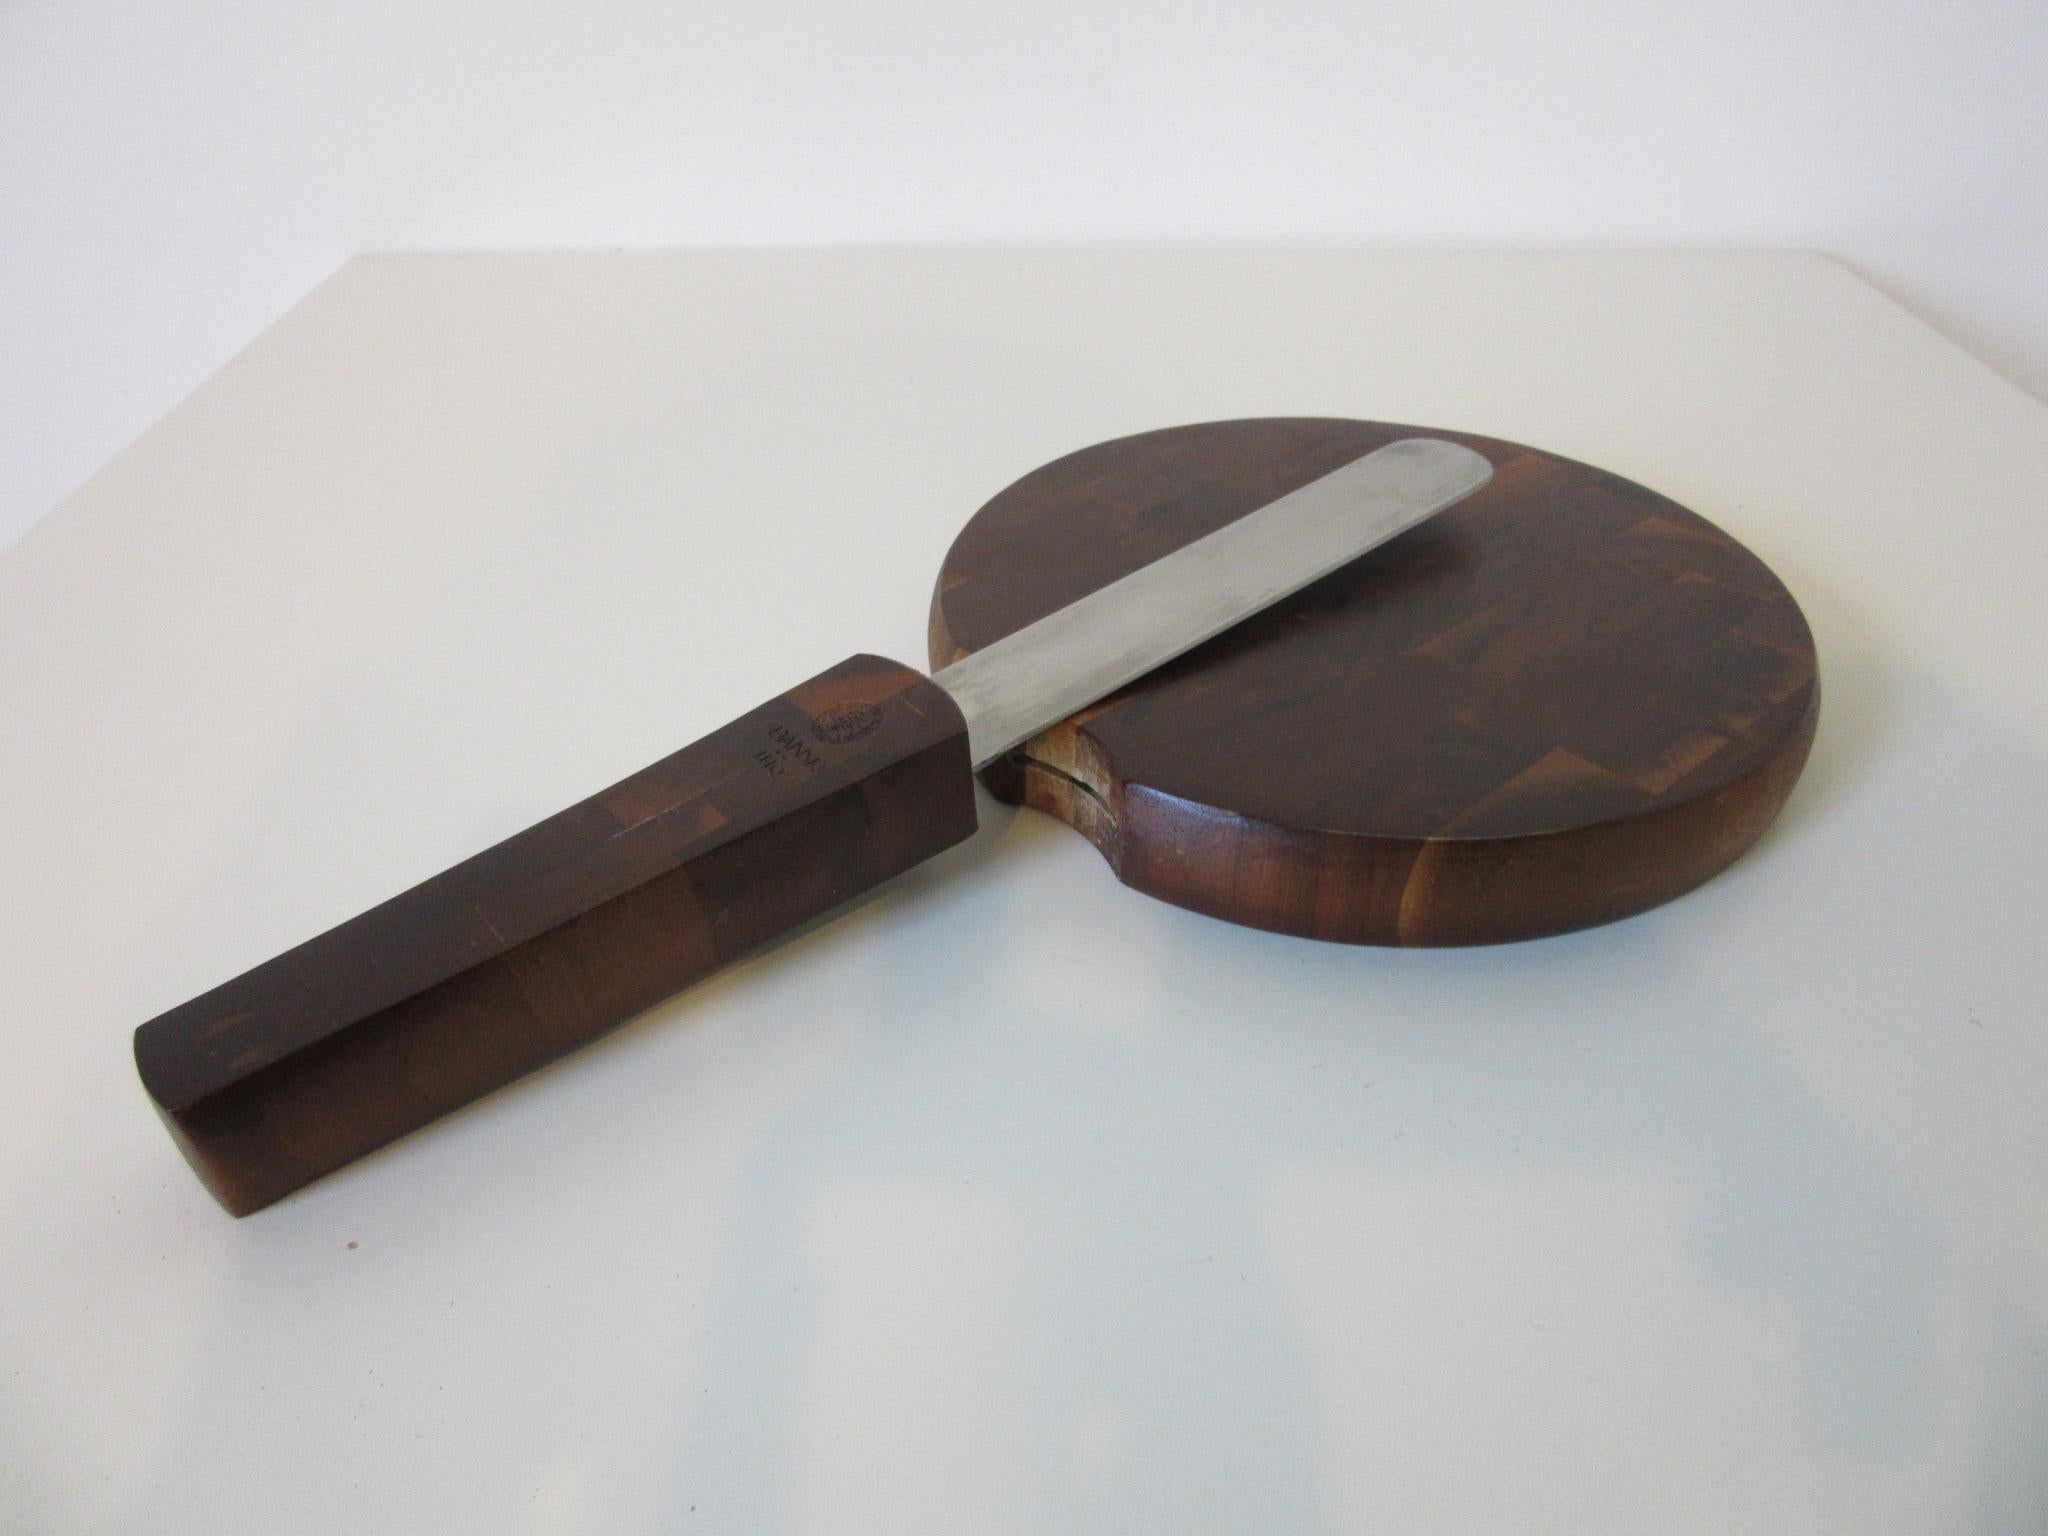 A beautifully designed mosaic rosewood cheese board with integrated stainless steel sharp edge knife as the handle . An early production piece with the four ducks mark and JHQ with Dansk trademark to the knife handle, made in Denmark. The knife